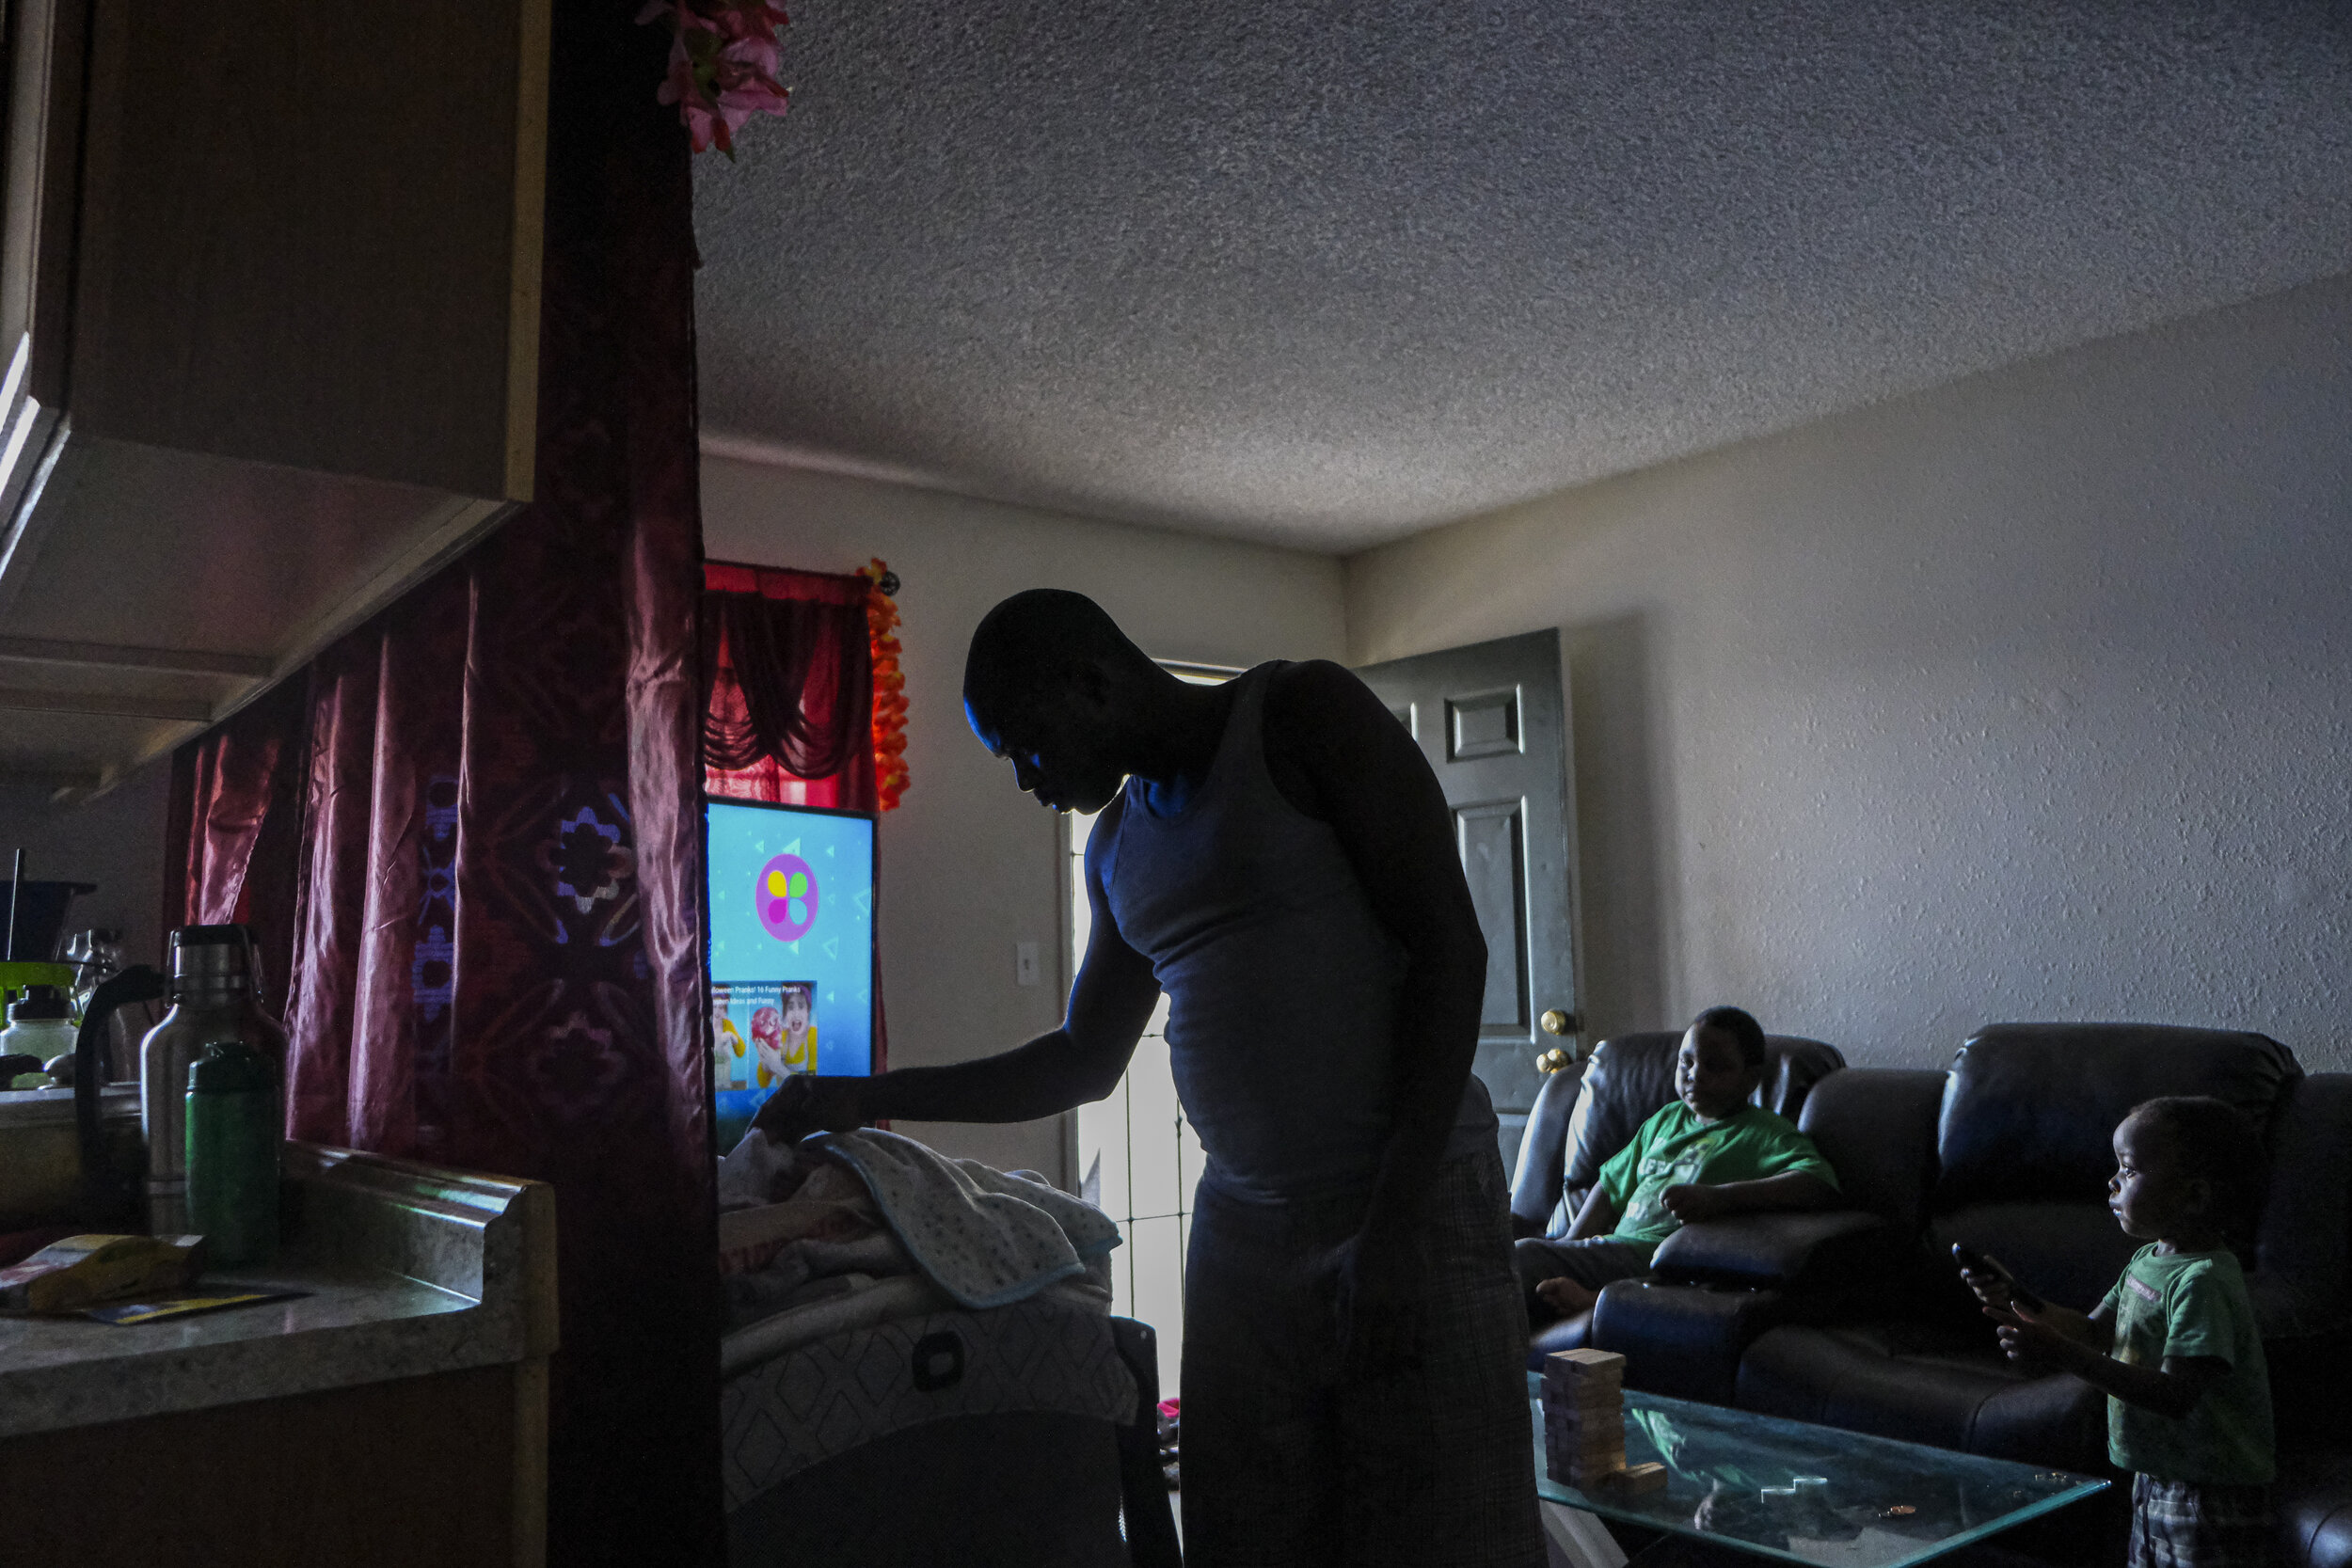  USA, San Diego, CA, October 27, 2020. After returning from work, Desire Ndayisenga, 40, checks on his newborn daughter. His wife Merie Sindayigaya, 38, says she’s thankful for Ndayisenga’s job after losing her own because of COVID-19. After fleeing 